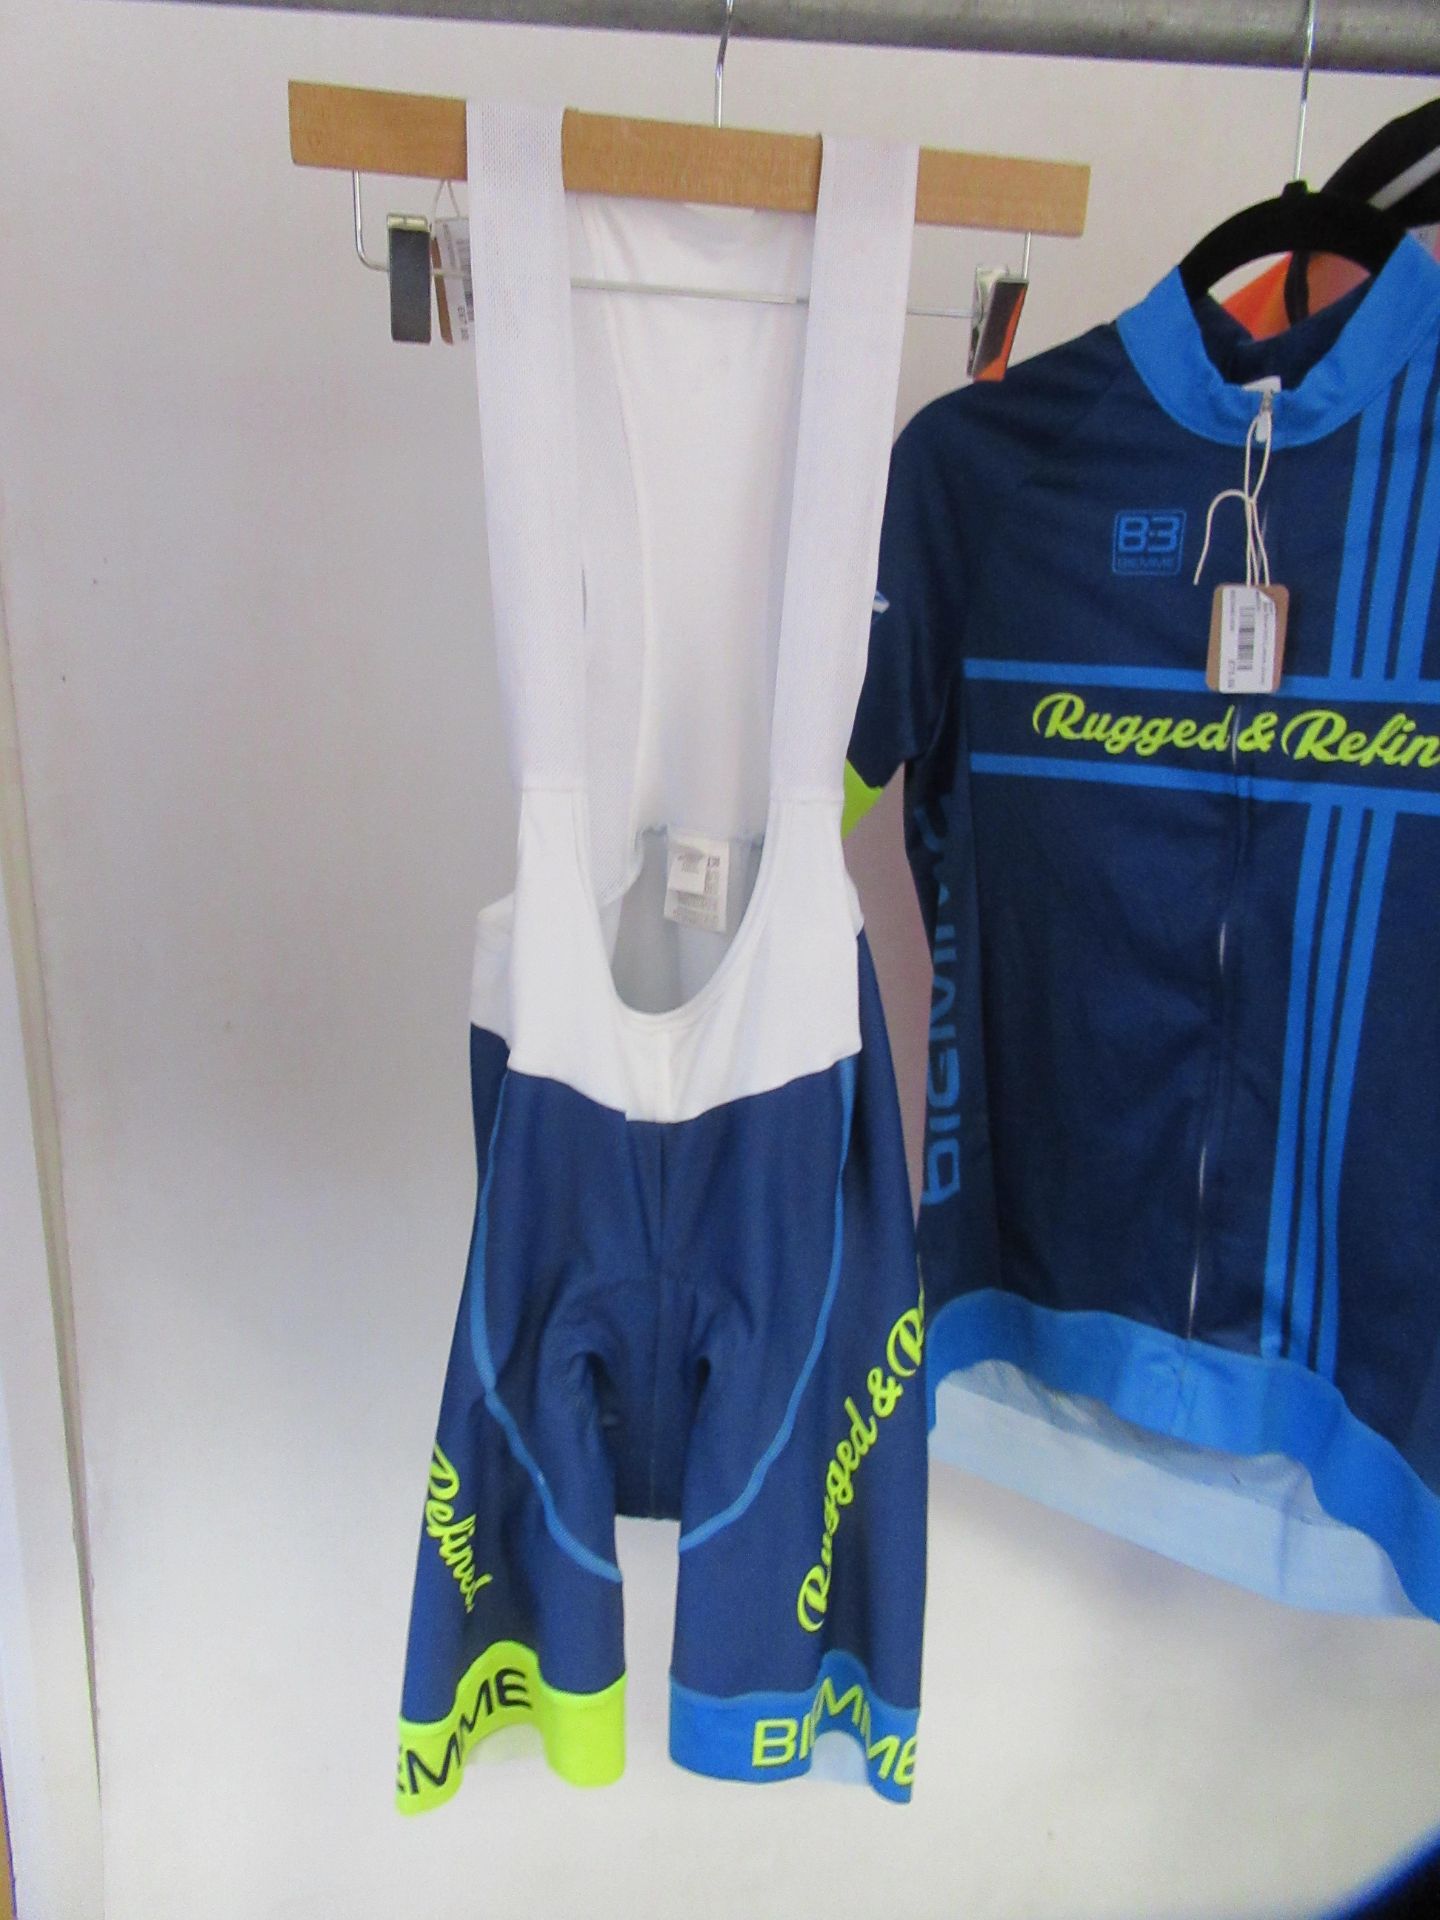 M Biemme Male Cycling Clothes - Image 4 of 8